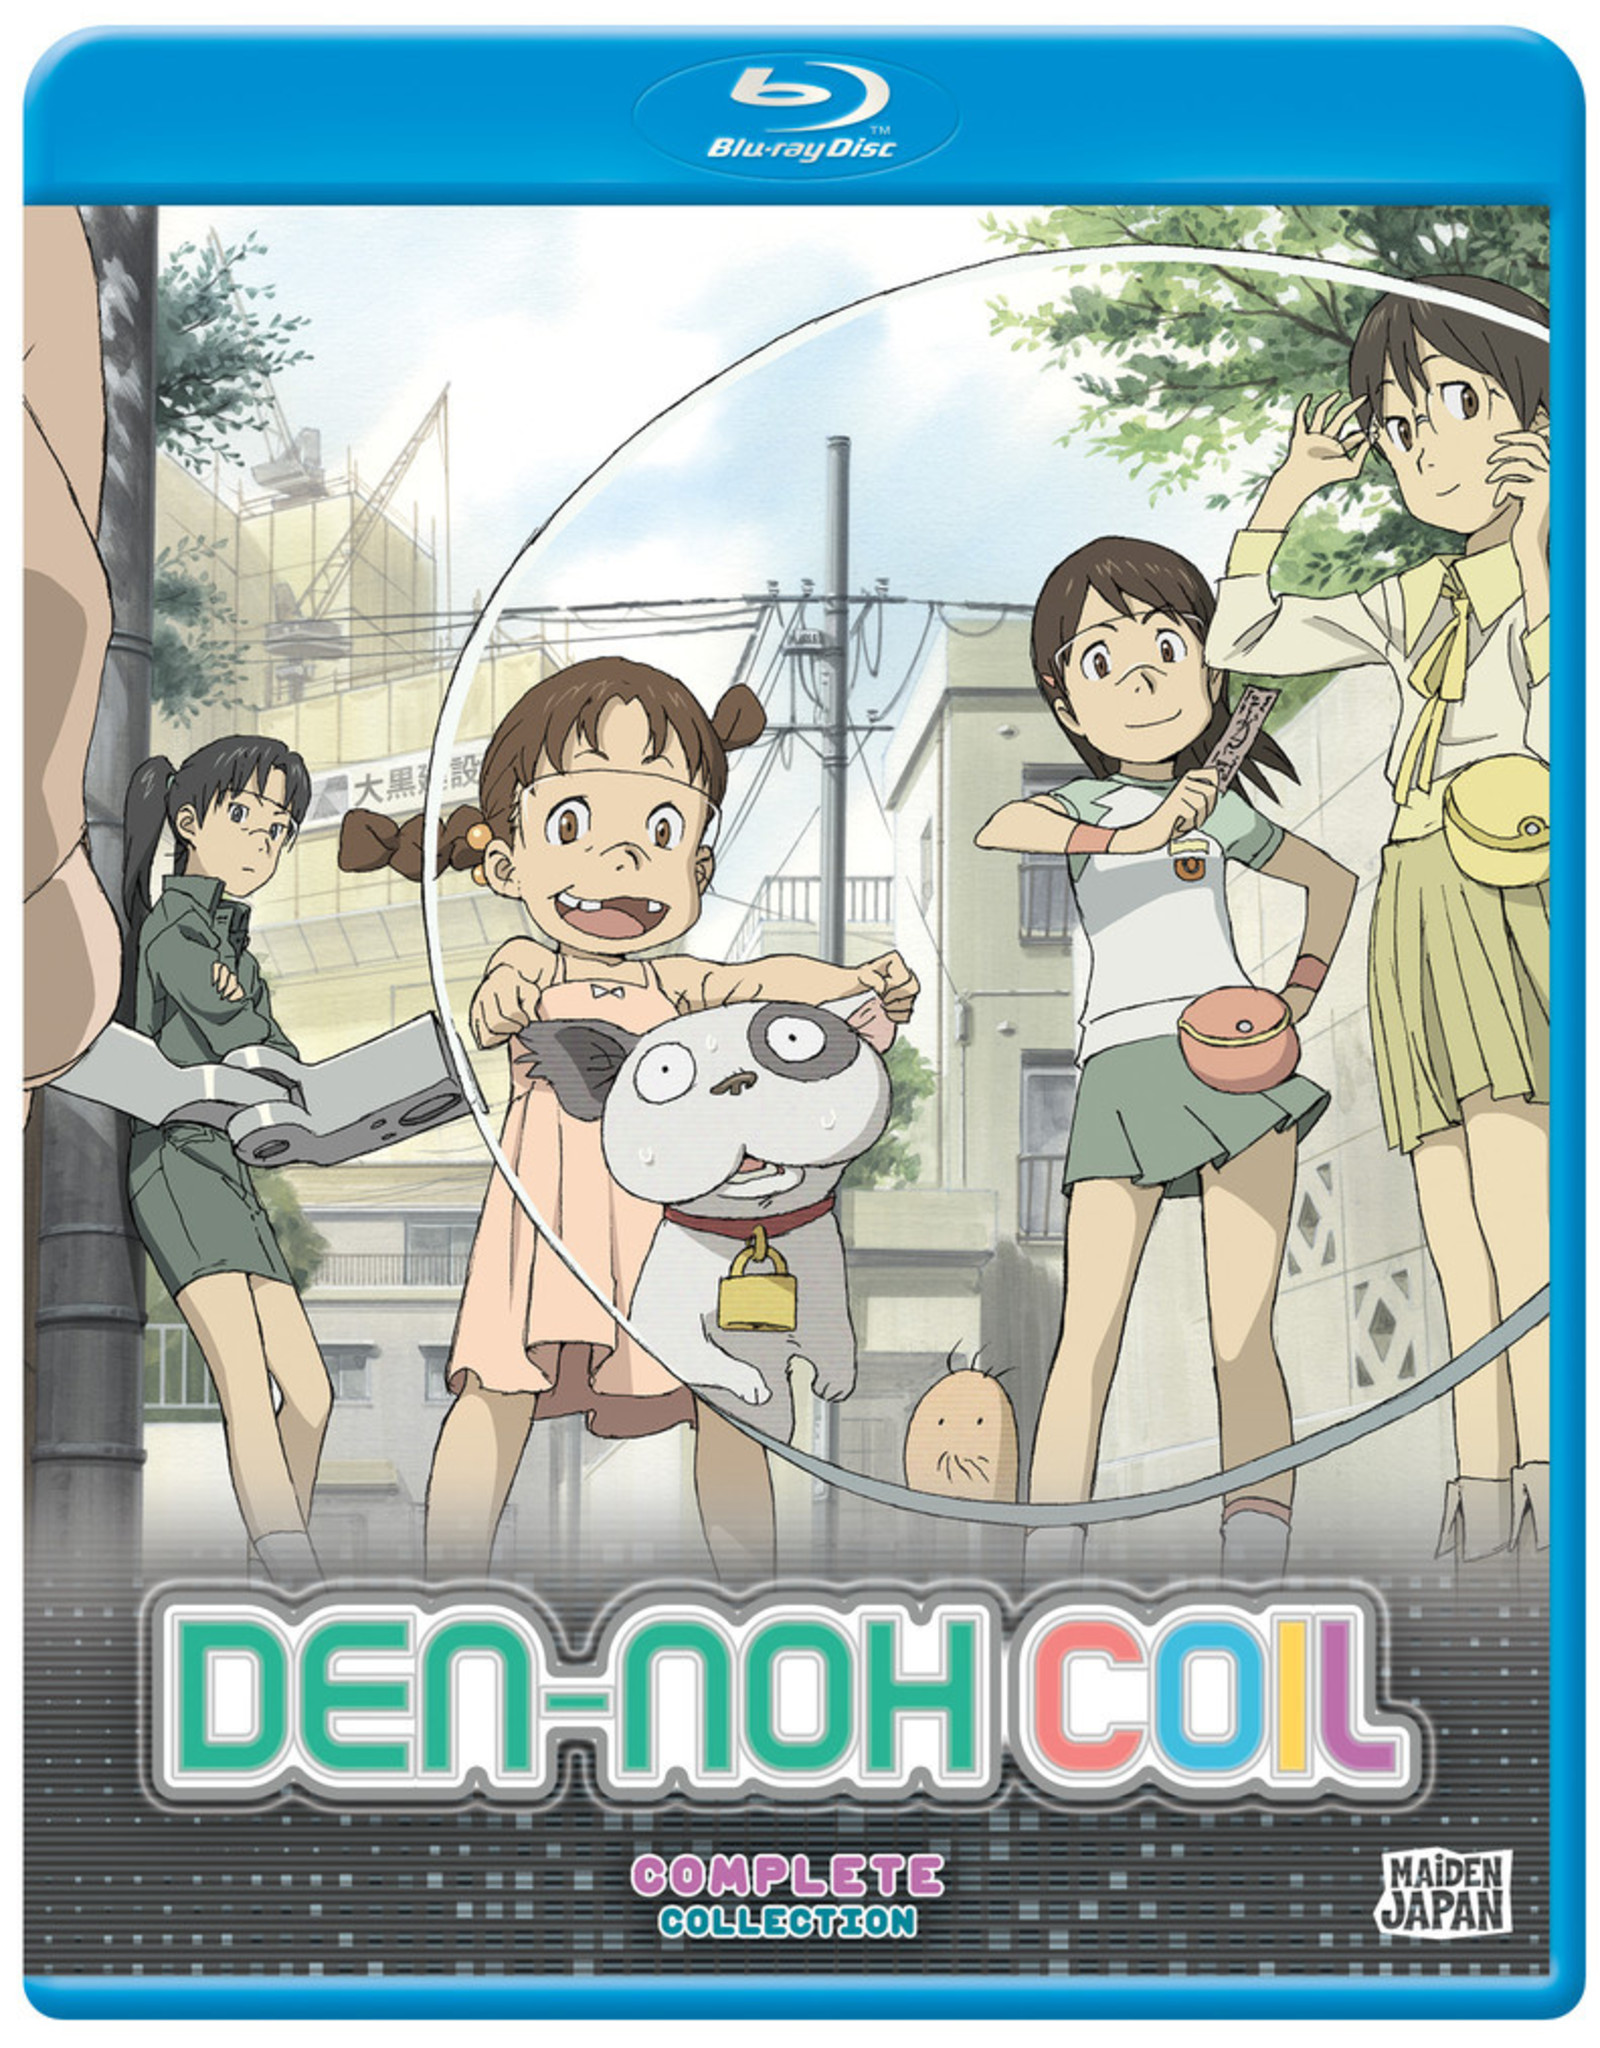 Den-Noh Coil Complete Blu-ray Collection